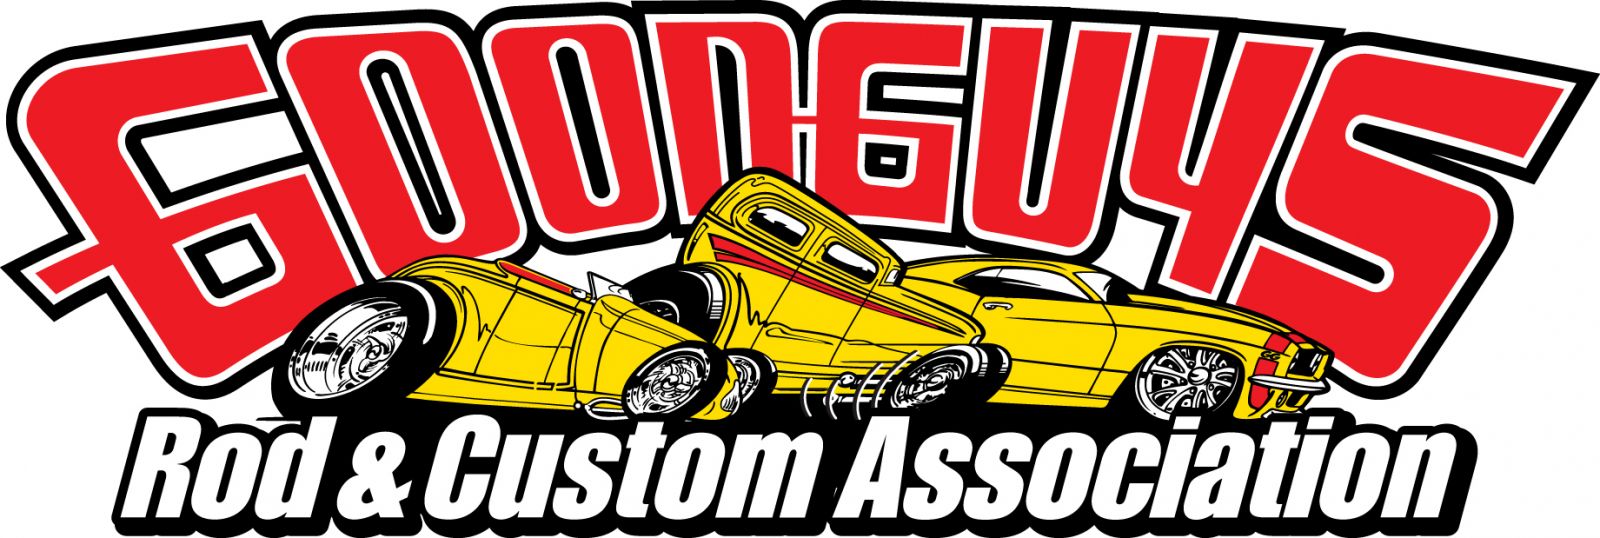 Upcoming Goodguys Events Postponed | THE SHOP